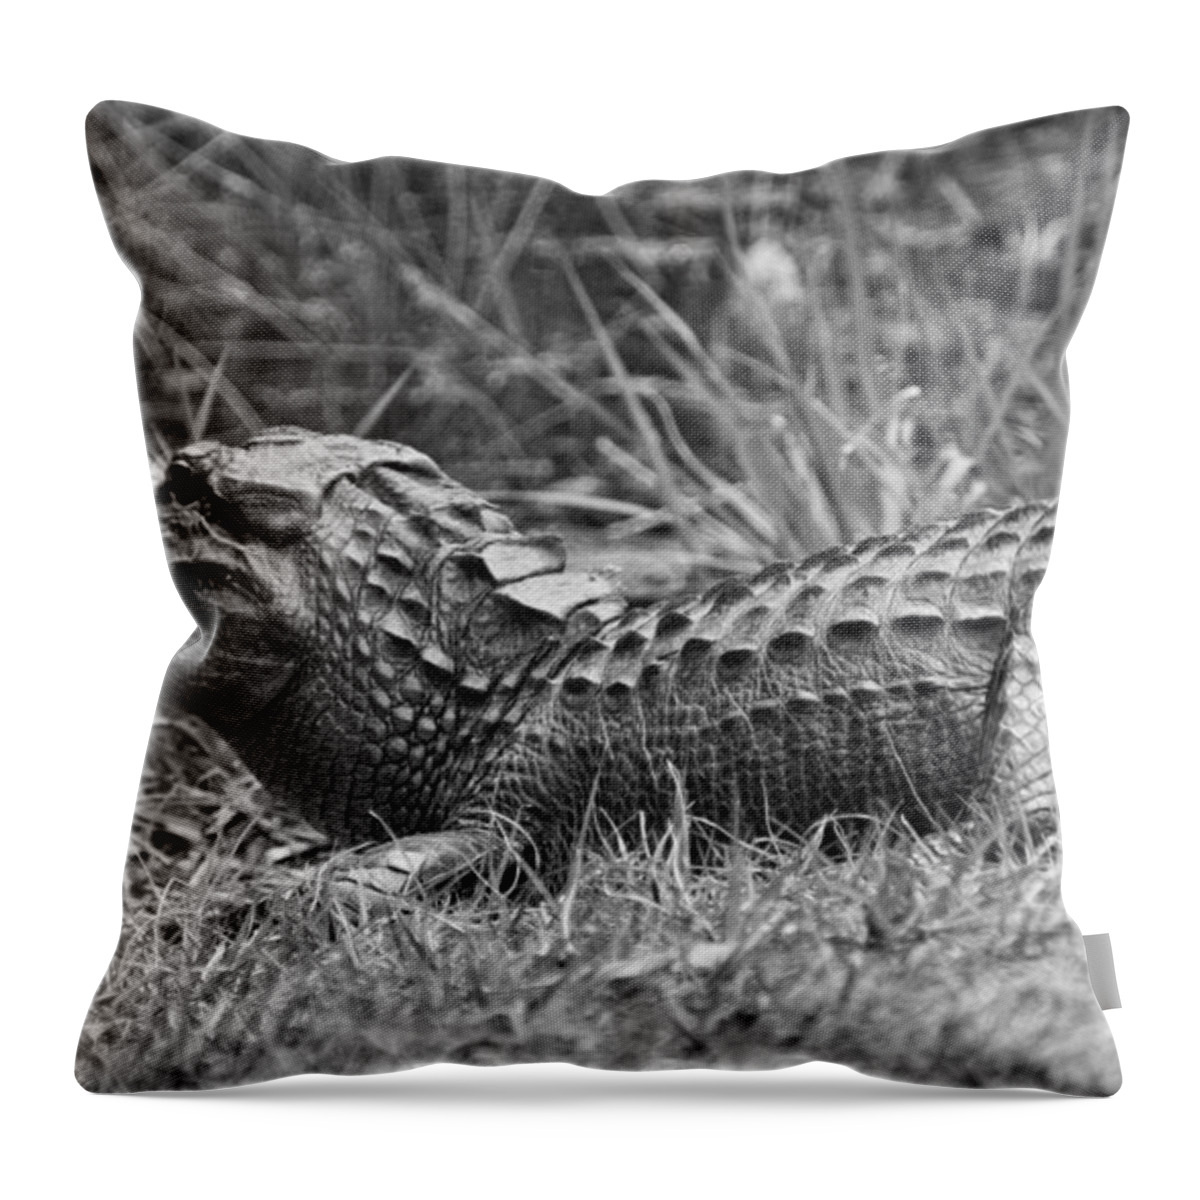 Alligator Throw Pillow featuring the photograph An American Alligator by Southern Photo